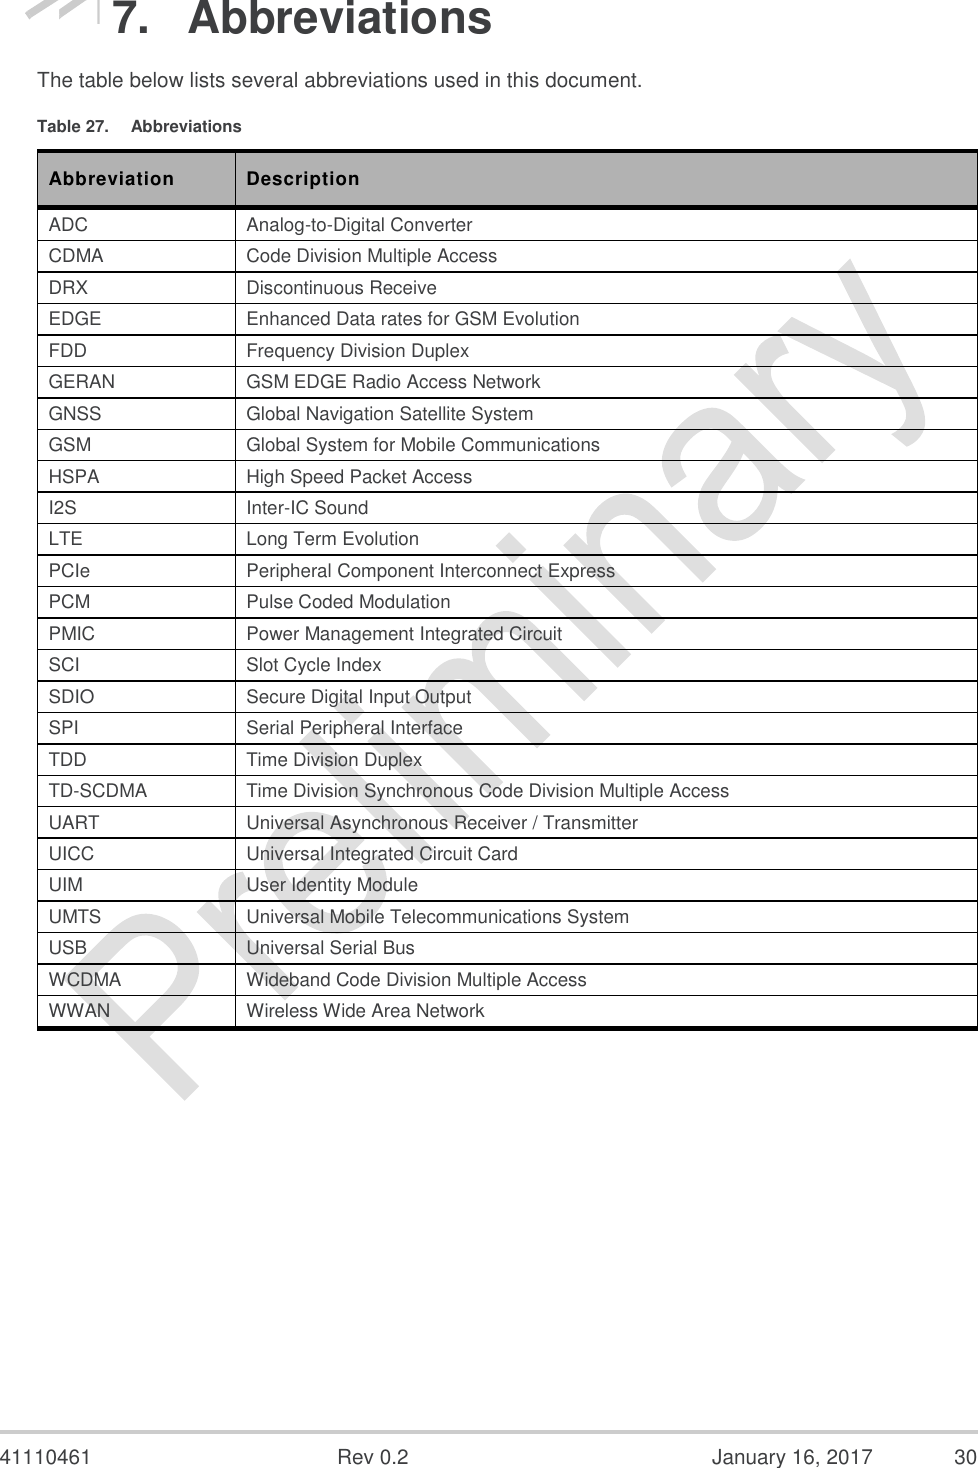  41110461  Rev 0.2  January 16, 2017  30 7.  Abbreviations The table below lists several abbreviations used in this document. Table 27.  Abbreviations Abbreviation Description ADC Analog-to-Digital Converter CDMA Code Division Multiple Access DRX Discontinuous Receive EDGE Enhanced Data rates for GSM Evolution FDD Frequency Division Duplex GERAN GSM EDGE Radio Access Network GNSS Global Navigation Satellite System GSM Global System for Mobile Communications HSPA High Speed Packet Access I2S Inter-IC Sound LTE Long Term Evolution PCIe Peripheral Component Interconnect Express PCM Pulse Coded Modulation PMIC Power Management Integrated Circuit SCI Slot Cycle Index SDIO Secure Digital Input Output SPI Serial Peripheral Interface TDD Time Division Duplex TD-SCDMA Time Division Synchronous Code Division Multiple Access UART Universal Asynchronous Receiver / Transmitter UICC Universal Integrated Circuit Card UIM User Identity Module UMTS Universal Mobile Telecommunications System USB Universal Serial Bus WCDMA Wideband Code Division Multiple Access WWAN Wireless Wide Area Network  